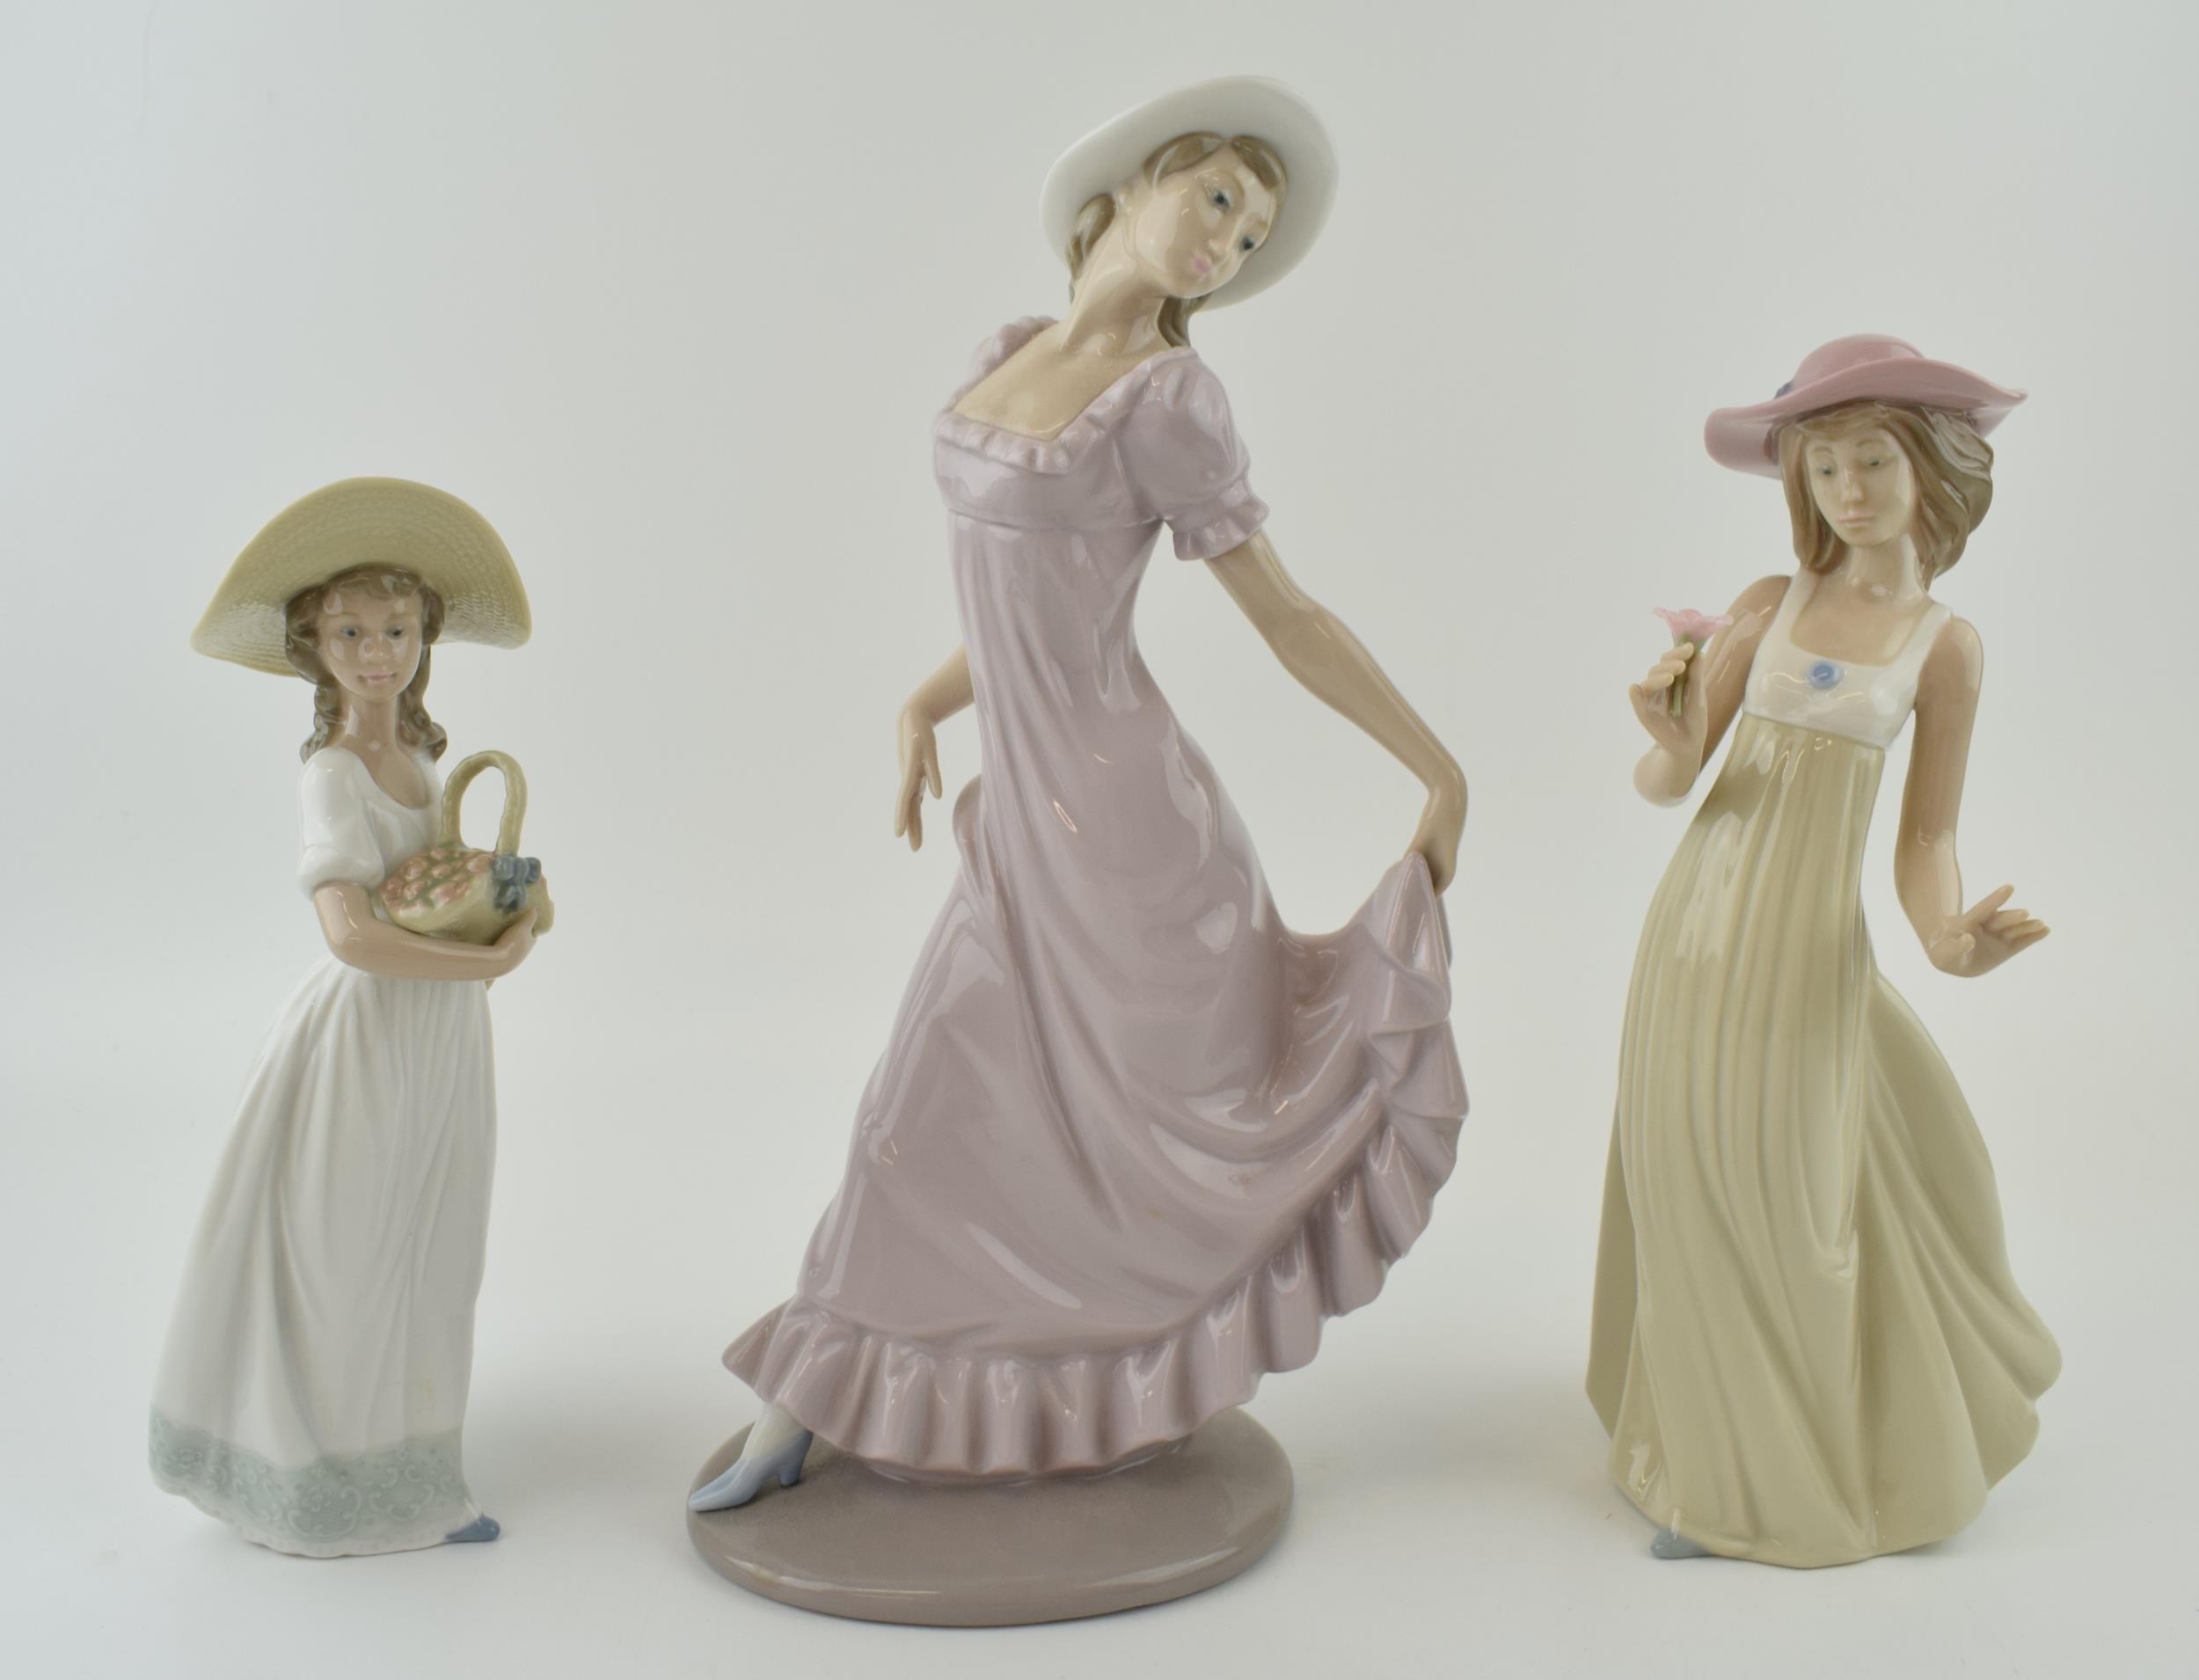 Nao figures to include a girl in a purple dress a girl with a basket of flowers and a girl holding a